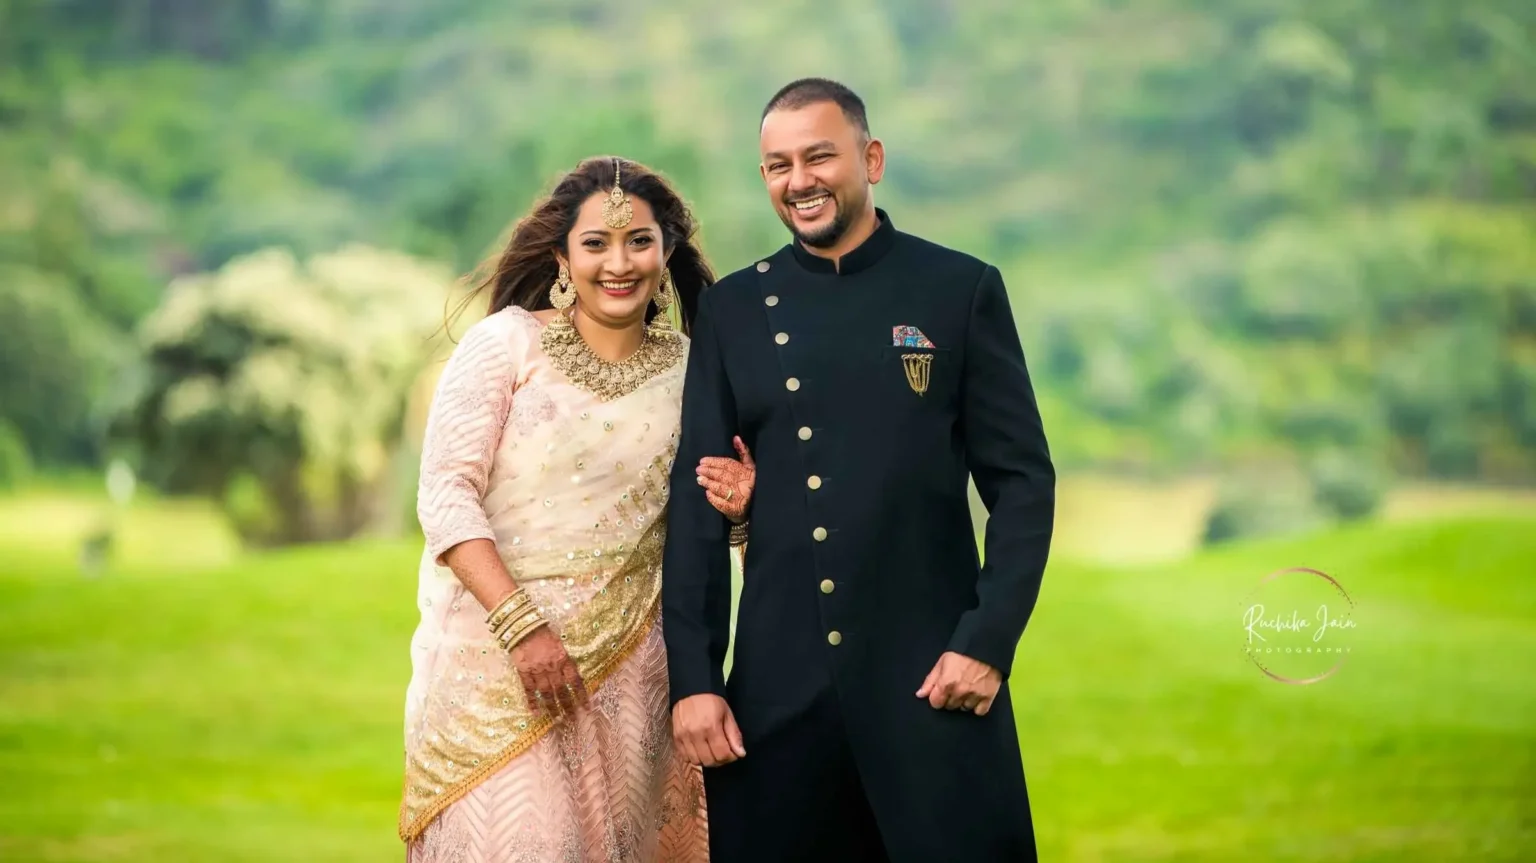 Wedding Photographer in Wellington: Smiling bride and groom captured by Ruchika Jain Photography